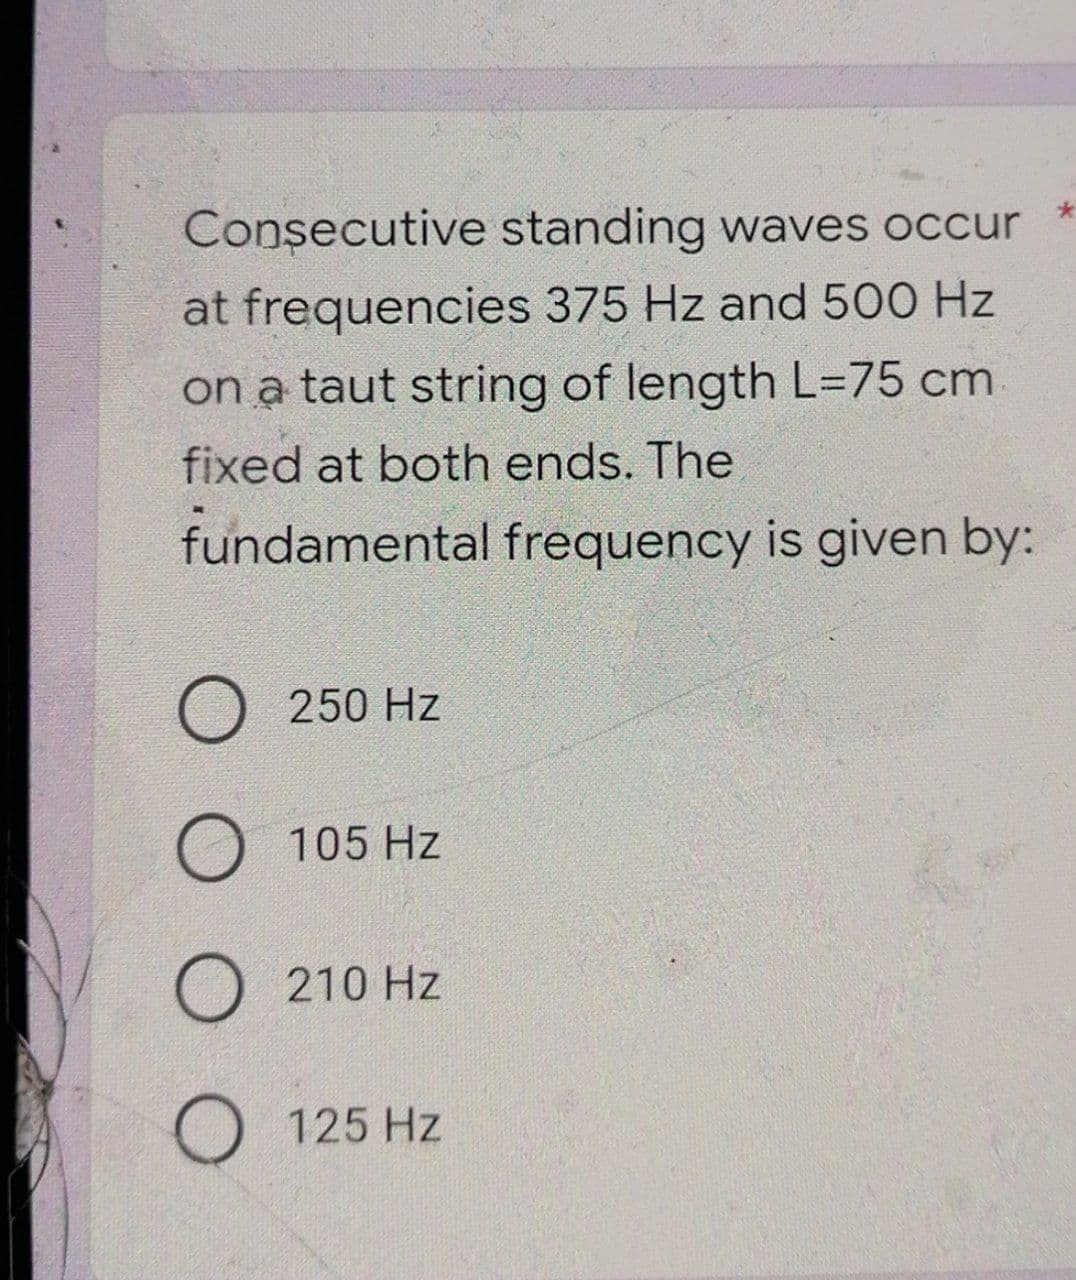 Consecutive
standing waves occur
at frequencies 375 Hz and 500 Hz
on a taut string of length L=75 cm
fixed at both ends. The
fundamental frequency is given by:
O 250 Hz
O
105 Hz
O 210 Hz
O 125 Hz